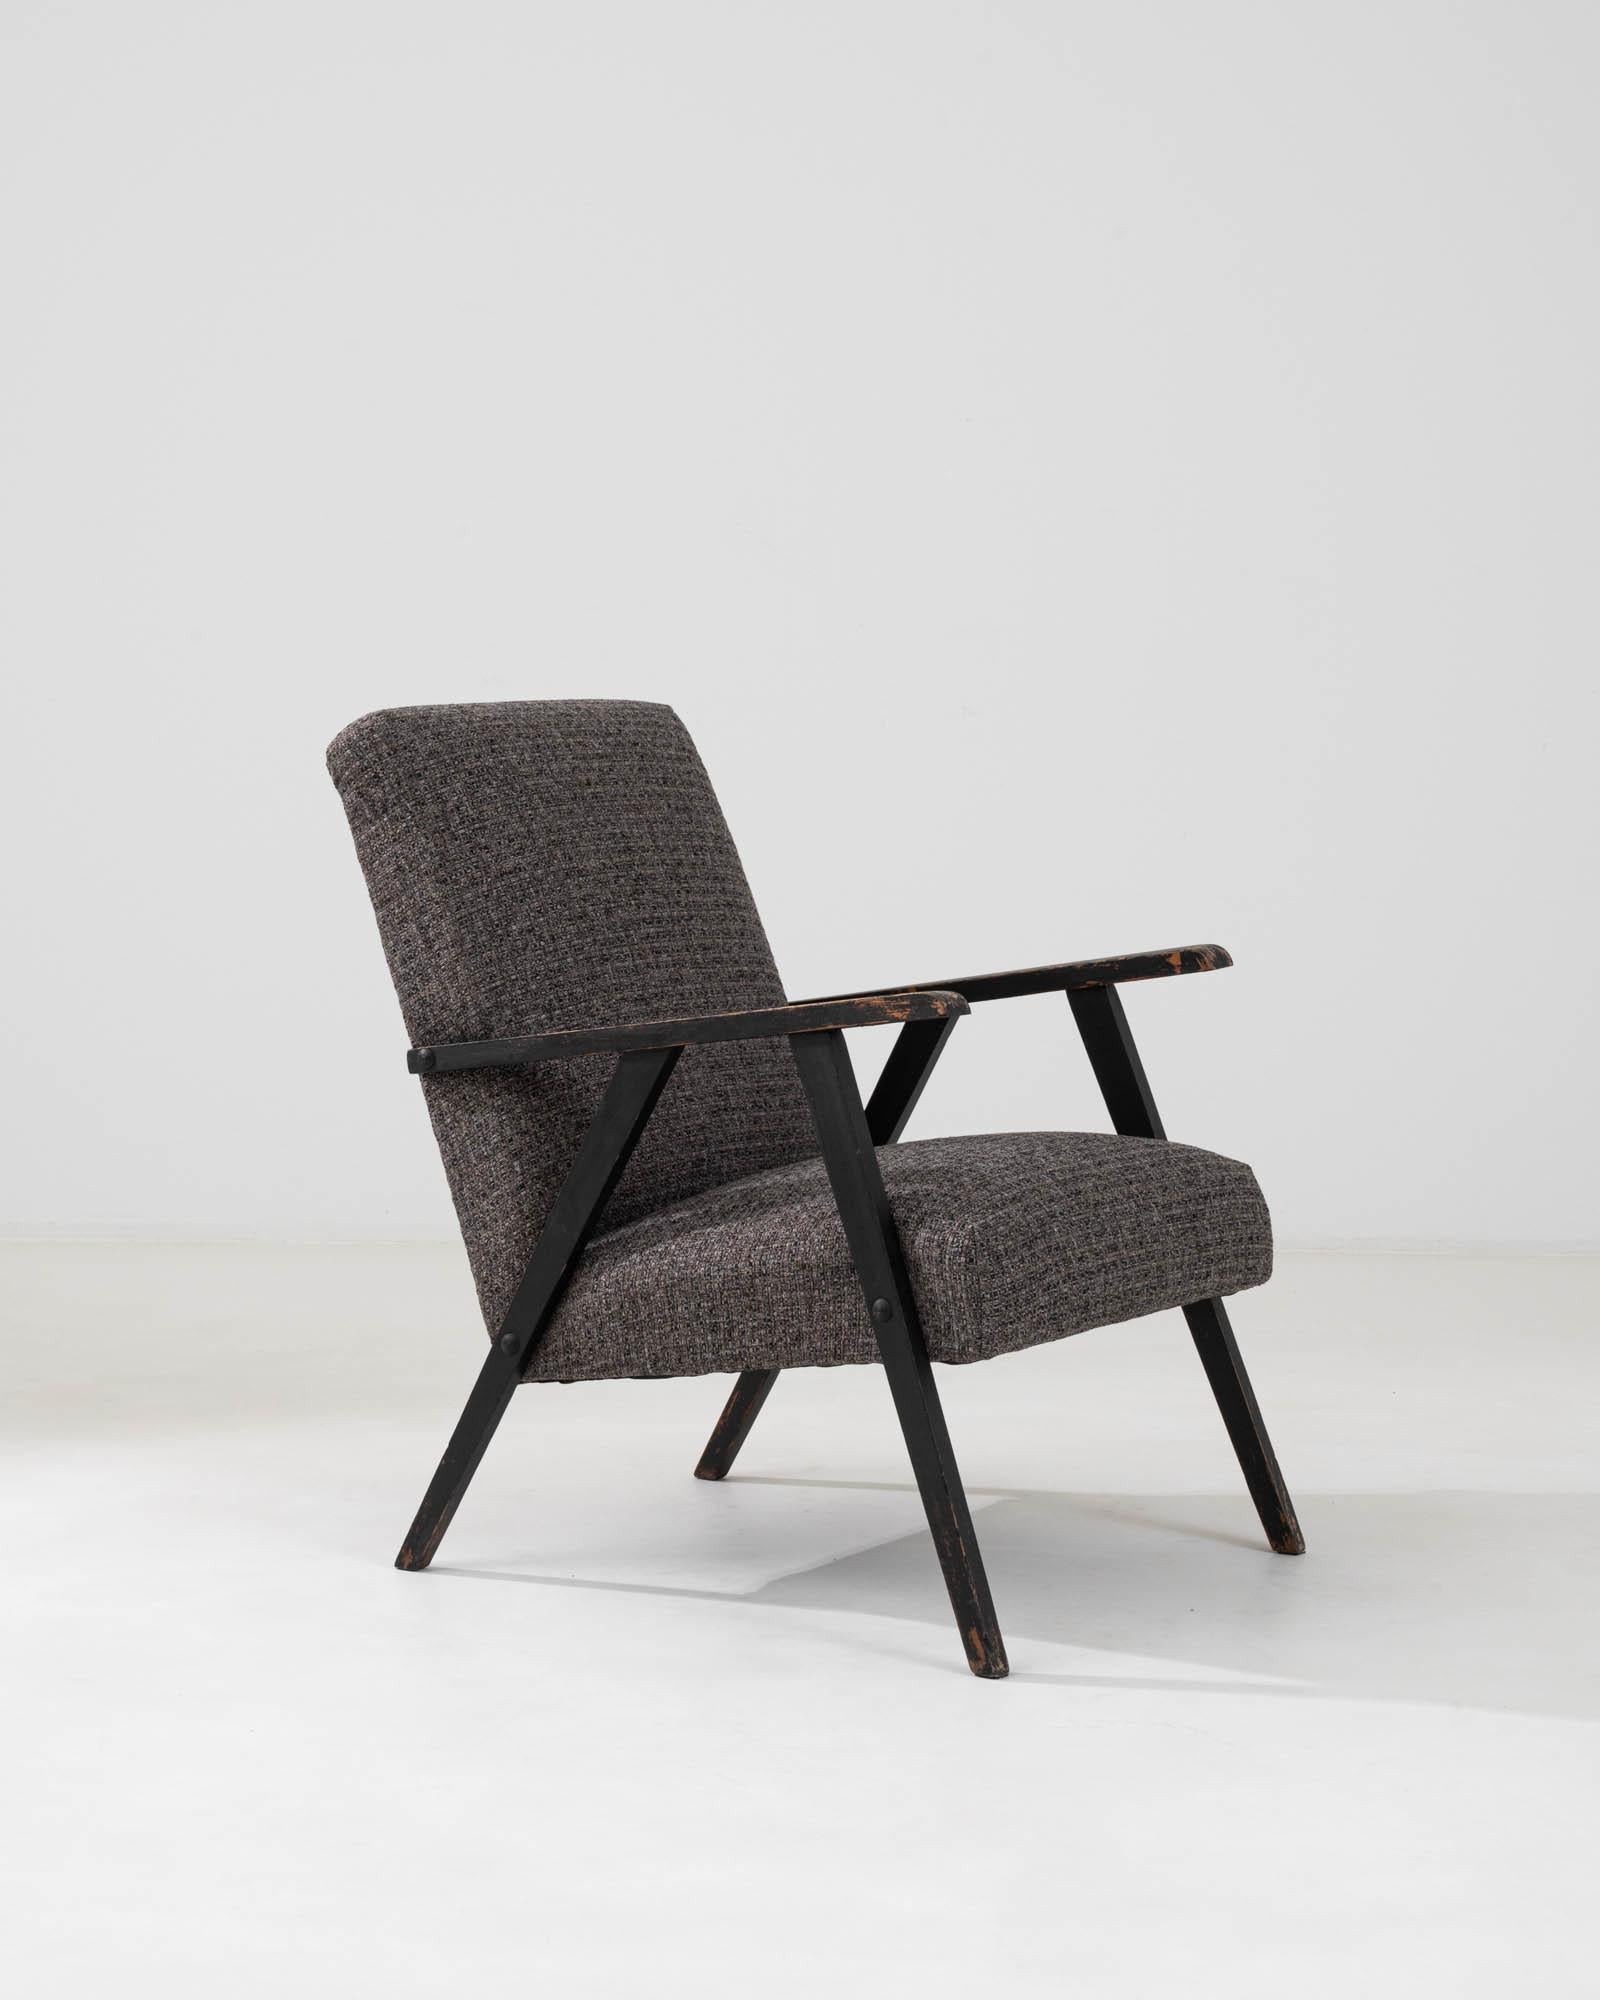 This 1960s Czech Upholstered Armchair encapsulates the essence of vintage appeal with its textured upholstery in muted earth tones. The chair's strikingly simple and functional design, with its clean lines and sleek black frame, nods to the era's